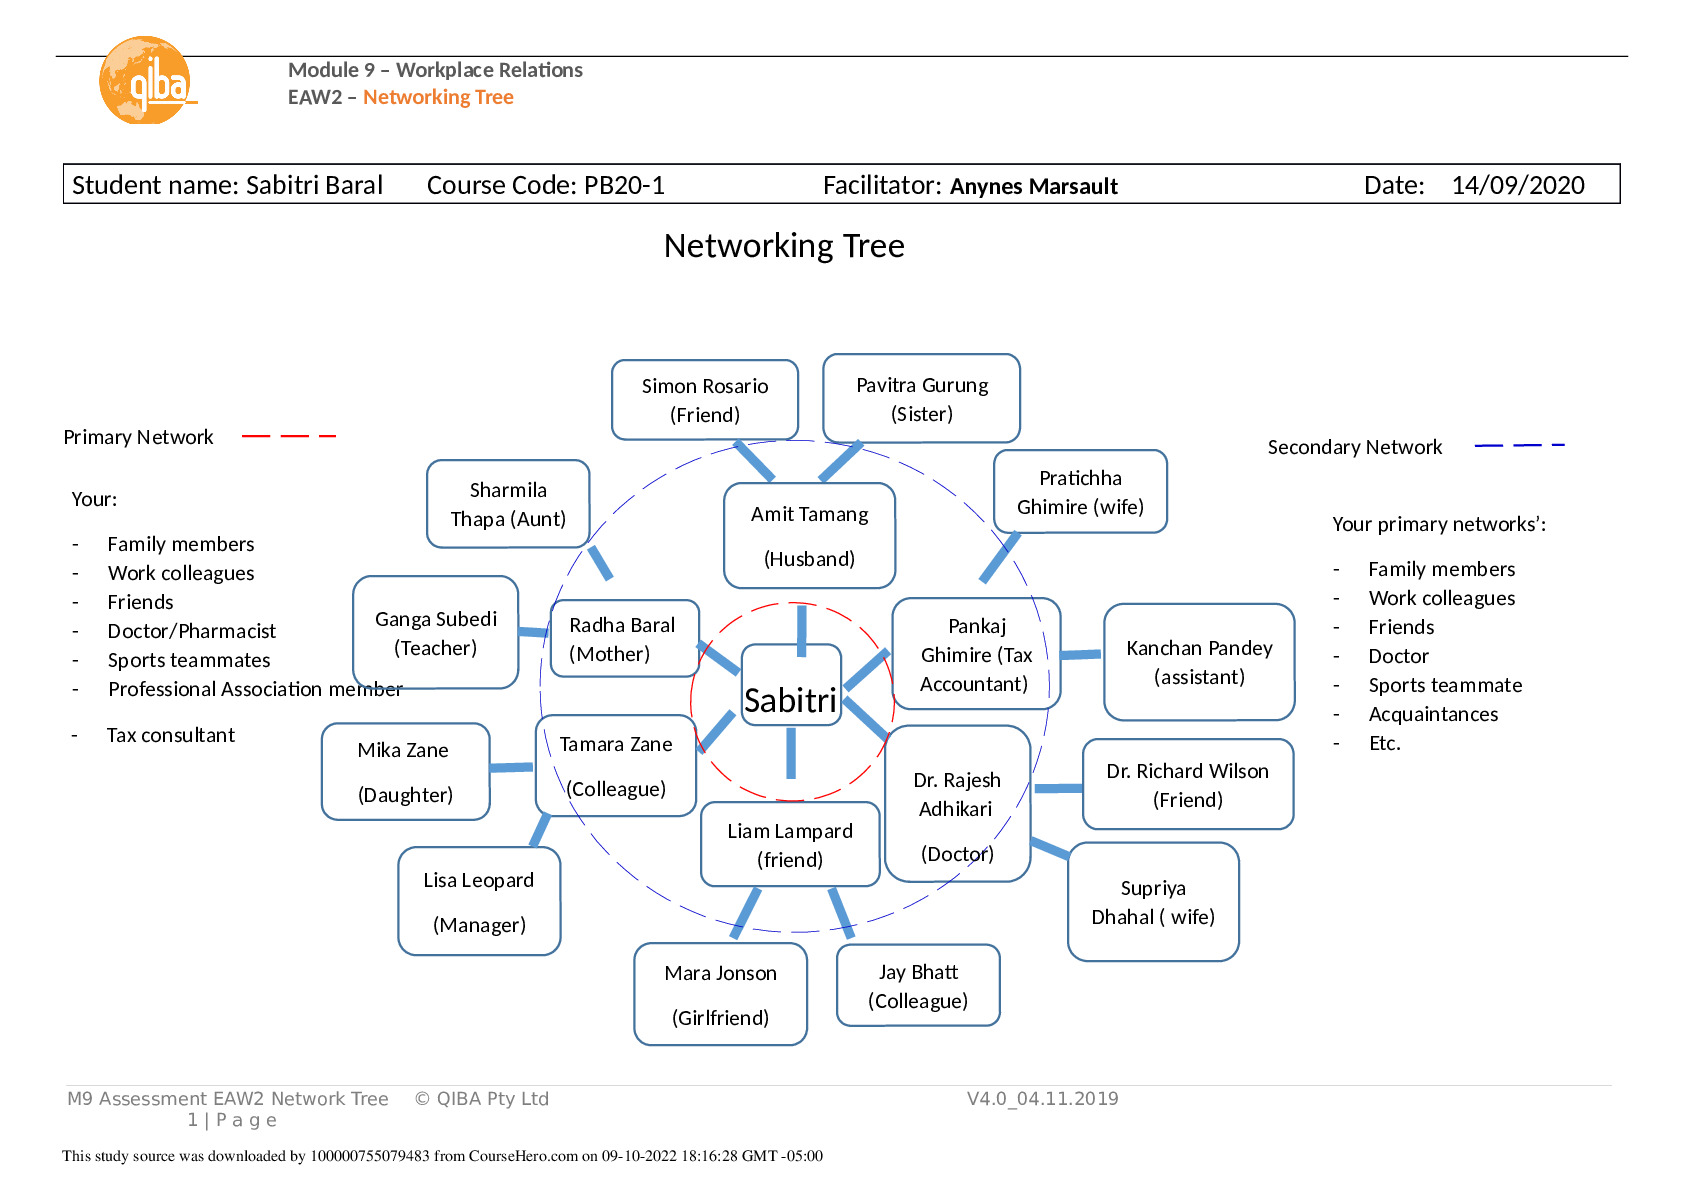 Sabitri_Baral_M9_EAW2_Networking_Tree.docx